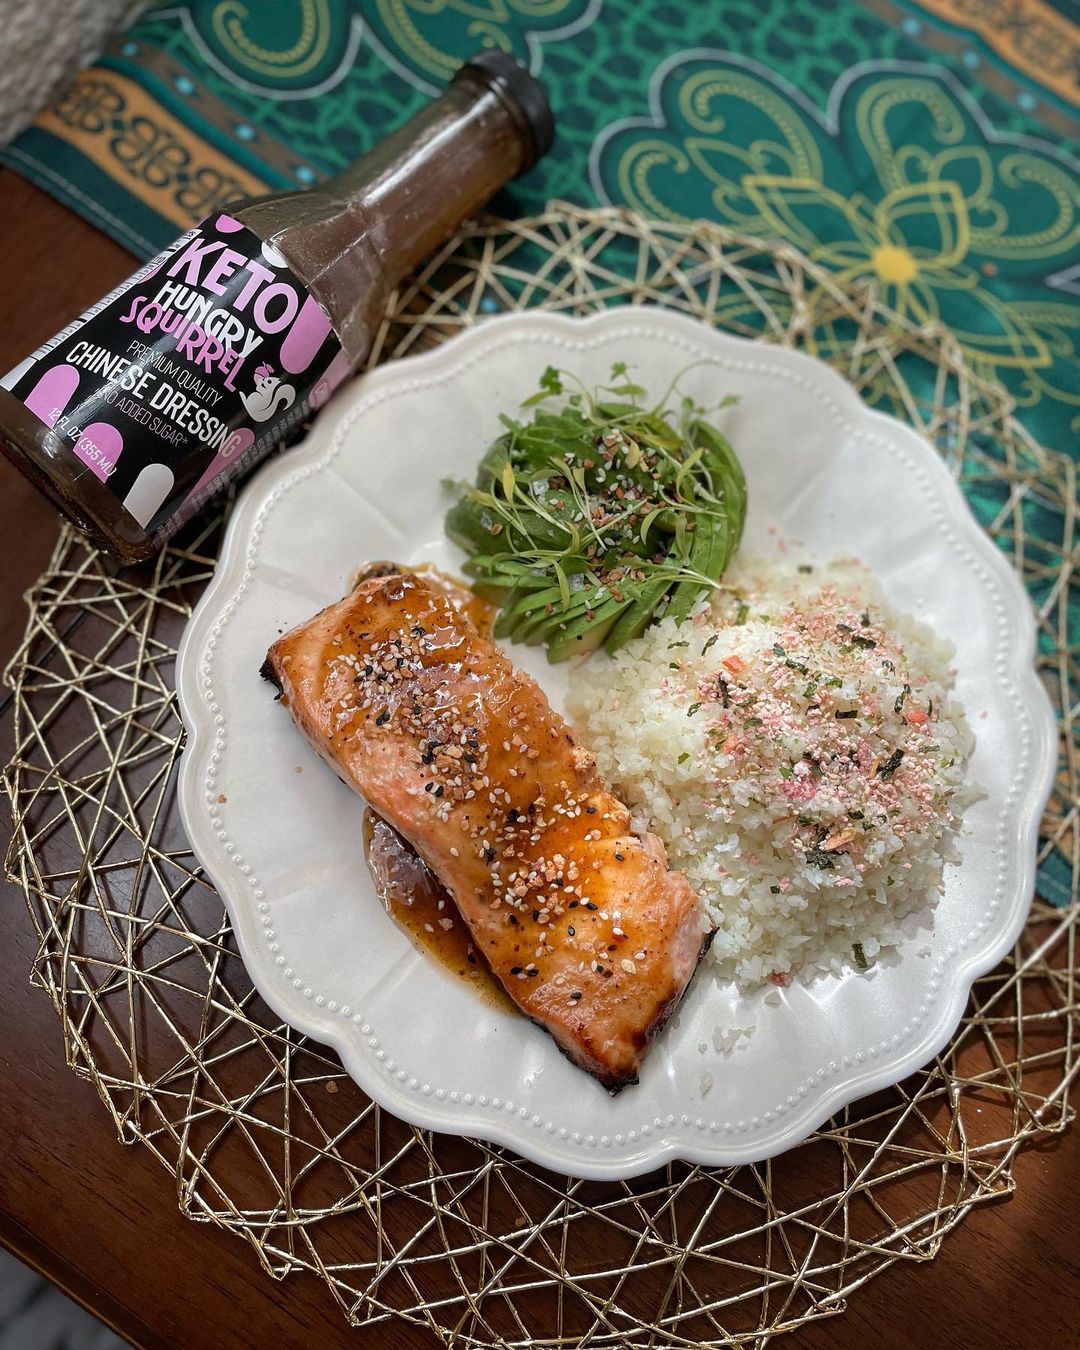 A Plate of grilled salmon, rice, avocado. With Hungry Squirrel Chinese Dressing. - From Instagram follower @keto.risa